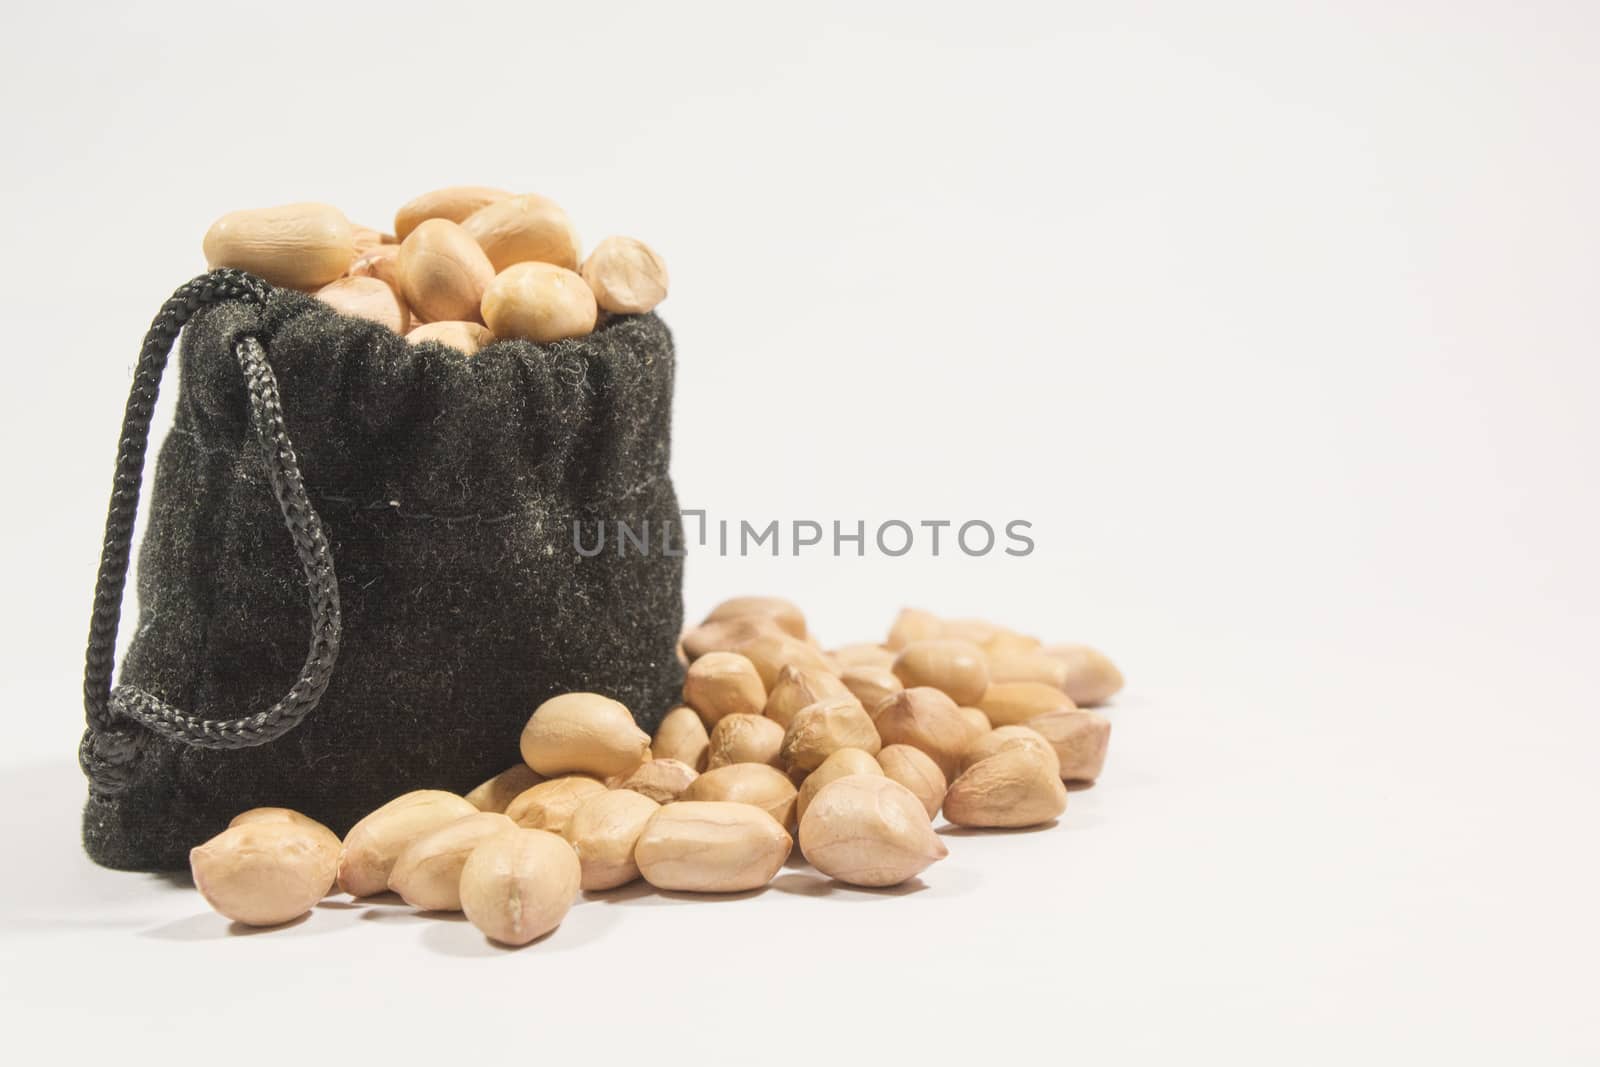 Peanuts in burlap bag isolated on white background.